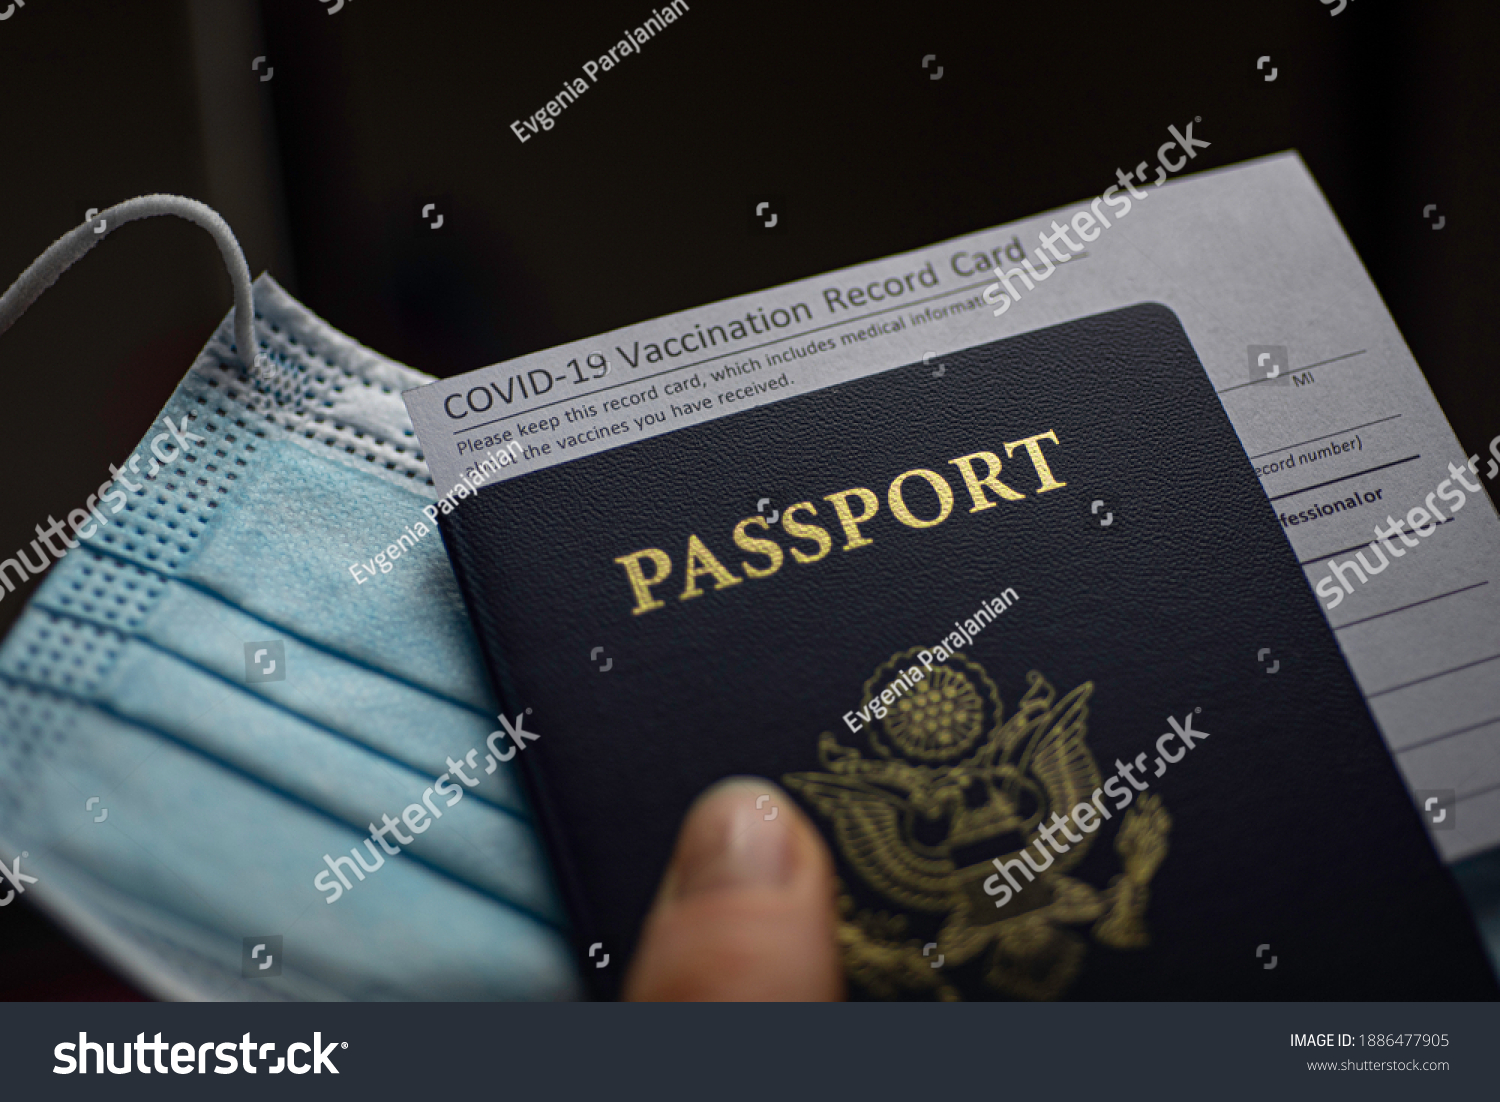 Blurred COVID-19 Vaccination Record card, Passport of USA and Medical Mask. Immune passport or certificate for travel concept.  #1886477905